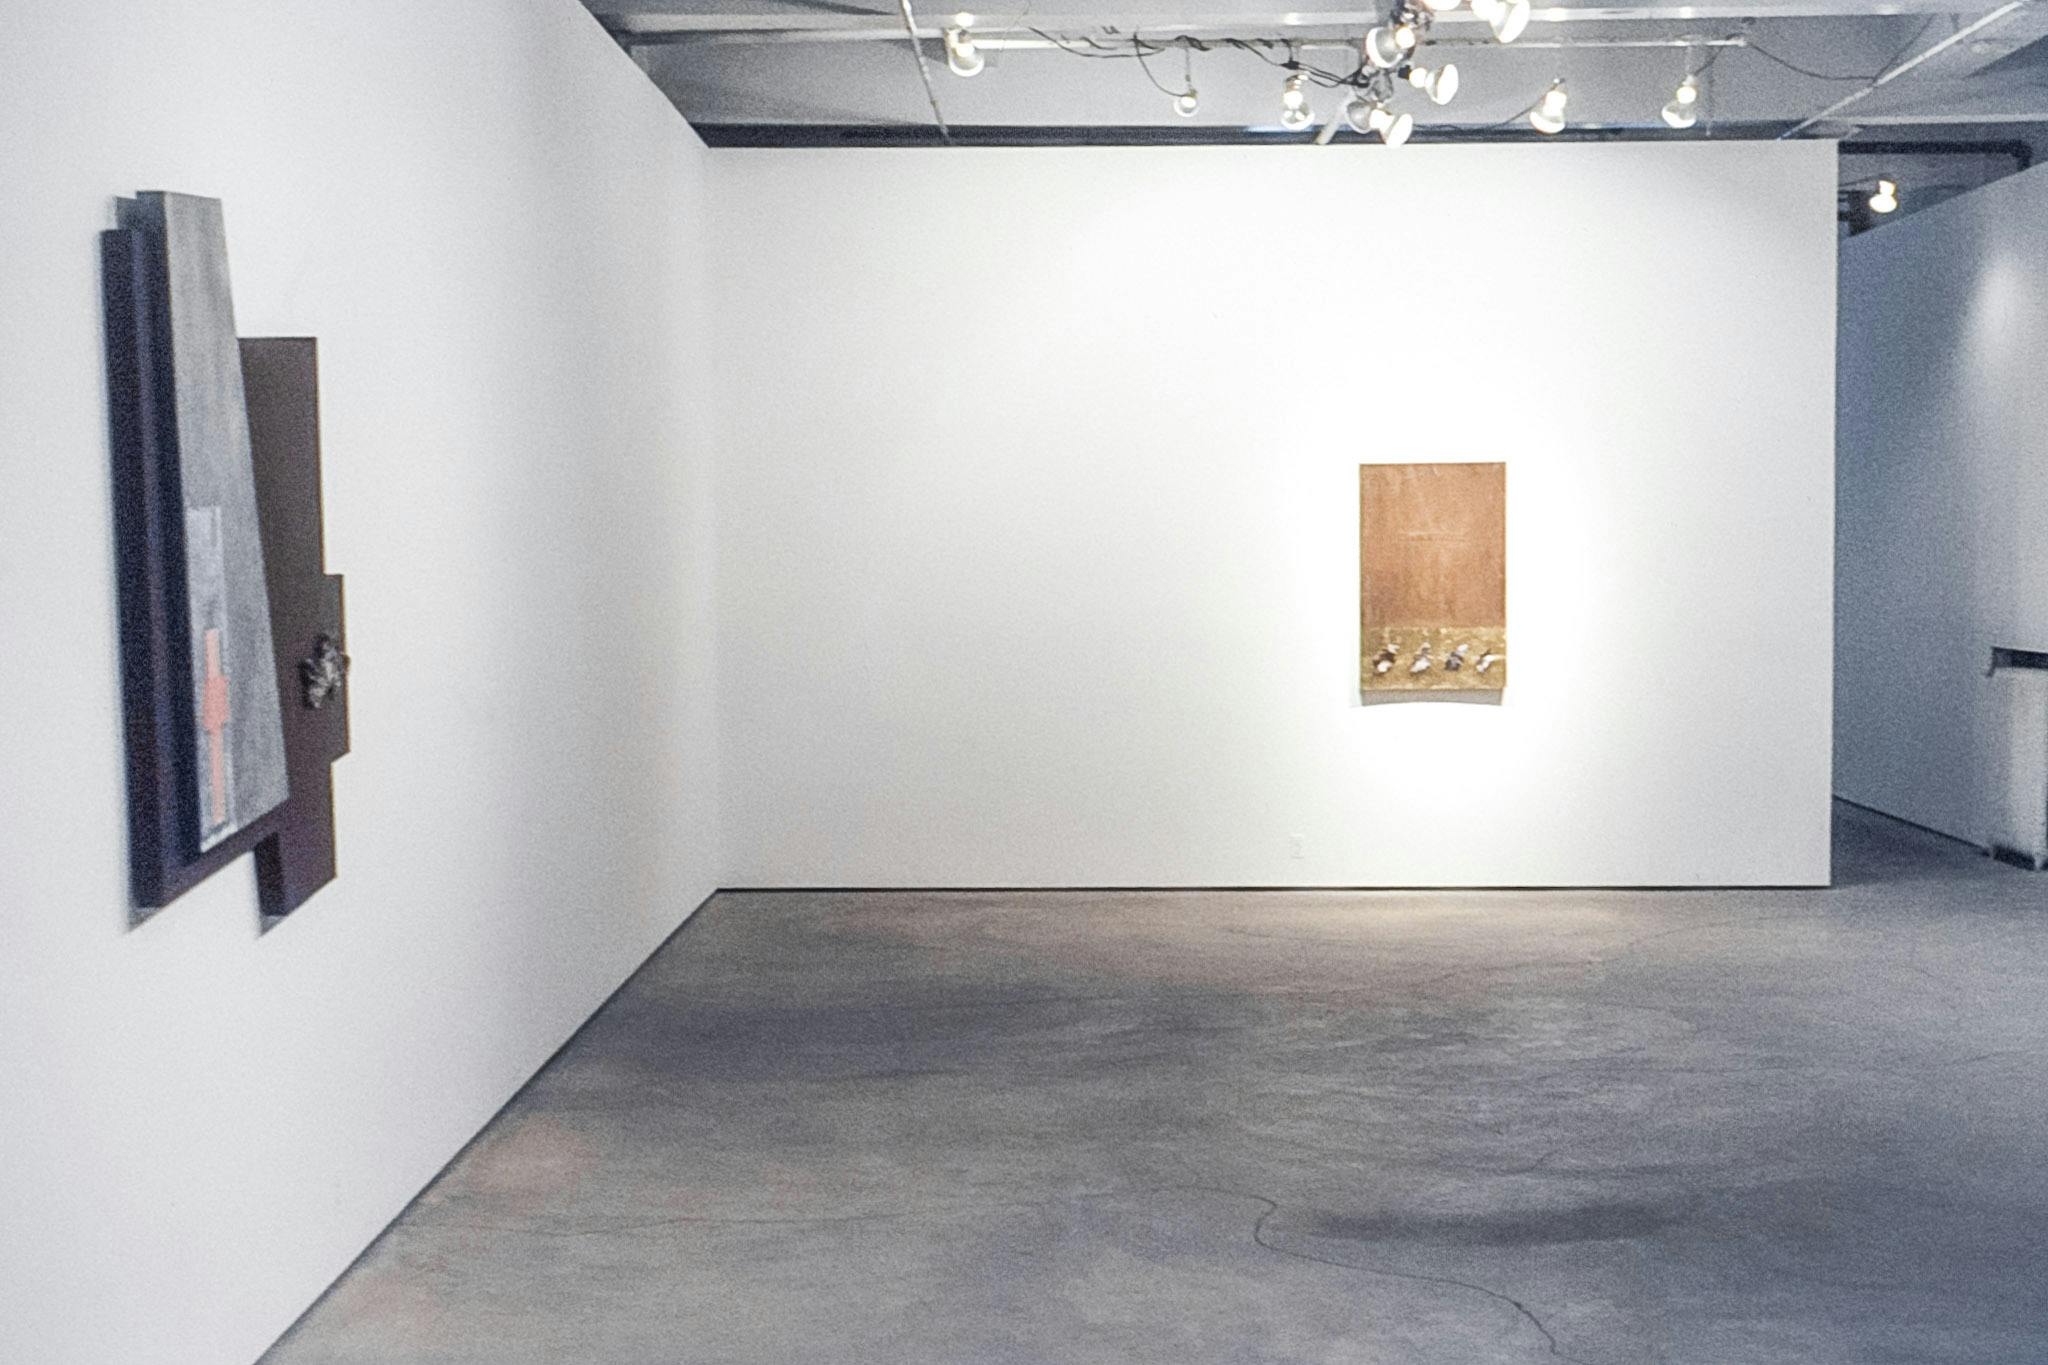 The corner of a gallery space. On one wall, there is a wood panel with gold foil and small bits of material along its bottom edge. On the other, an asymmetrical work with layered painted panels.